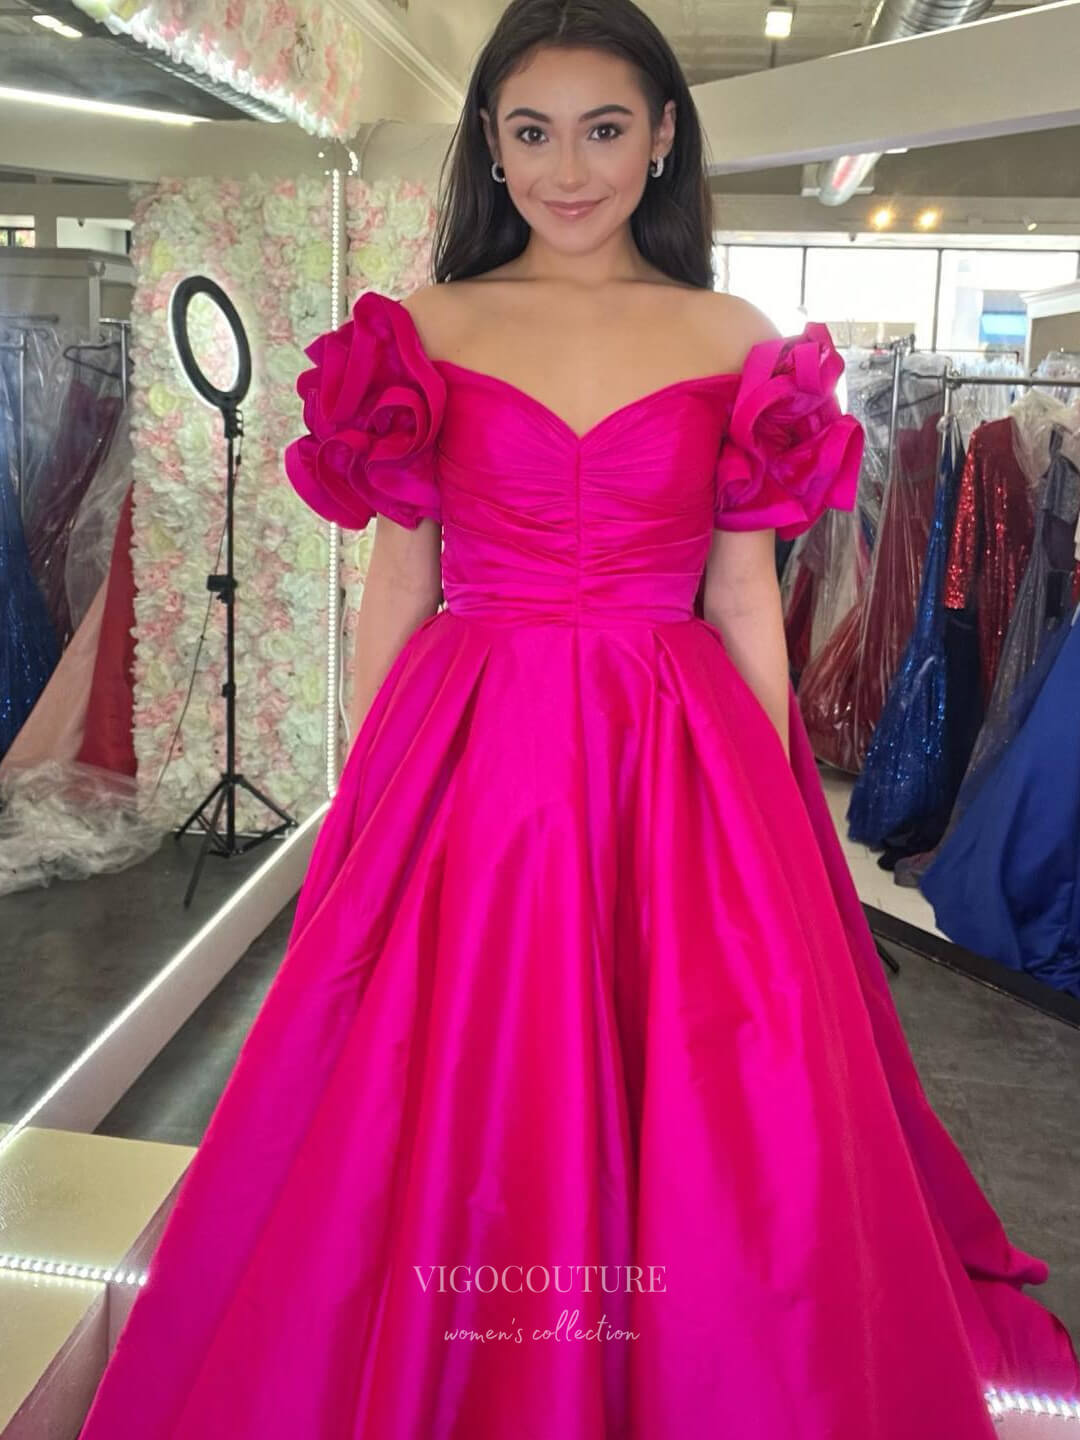 Puffed Sleeve Cheap Prom Dresses Satin Pleated Bodice Formal Gown 24154-Prom Dresses-vigocouture-Hot Pink-Custom Size-vigocouture